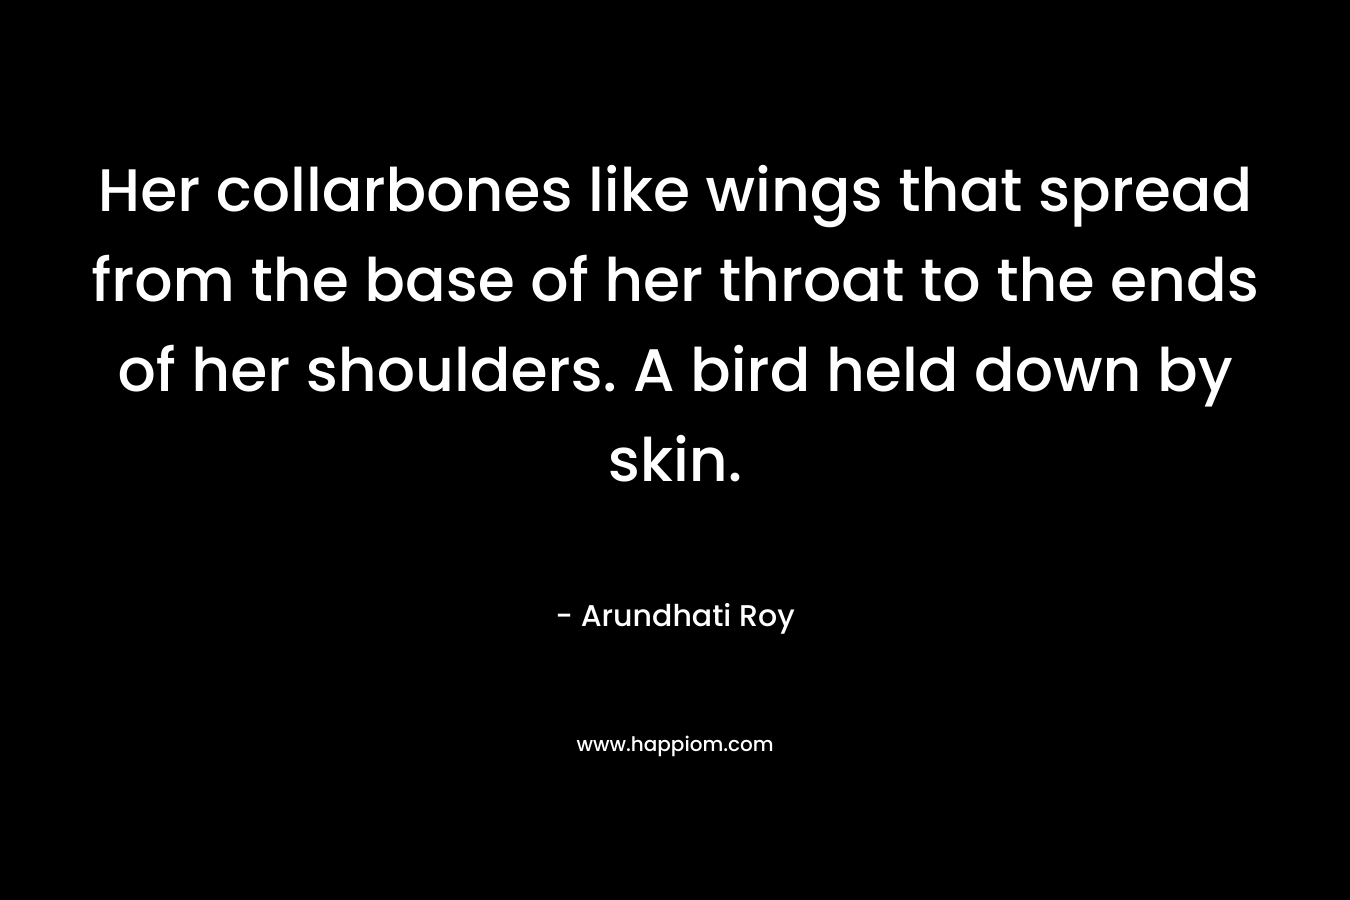 Her collarbones like wings that spread from the base of her throat to the ends of her shoulders. A bird held down by skin.